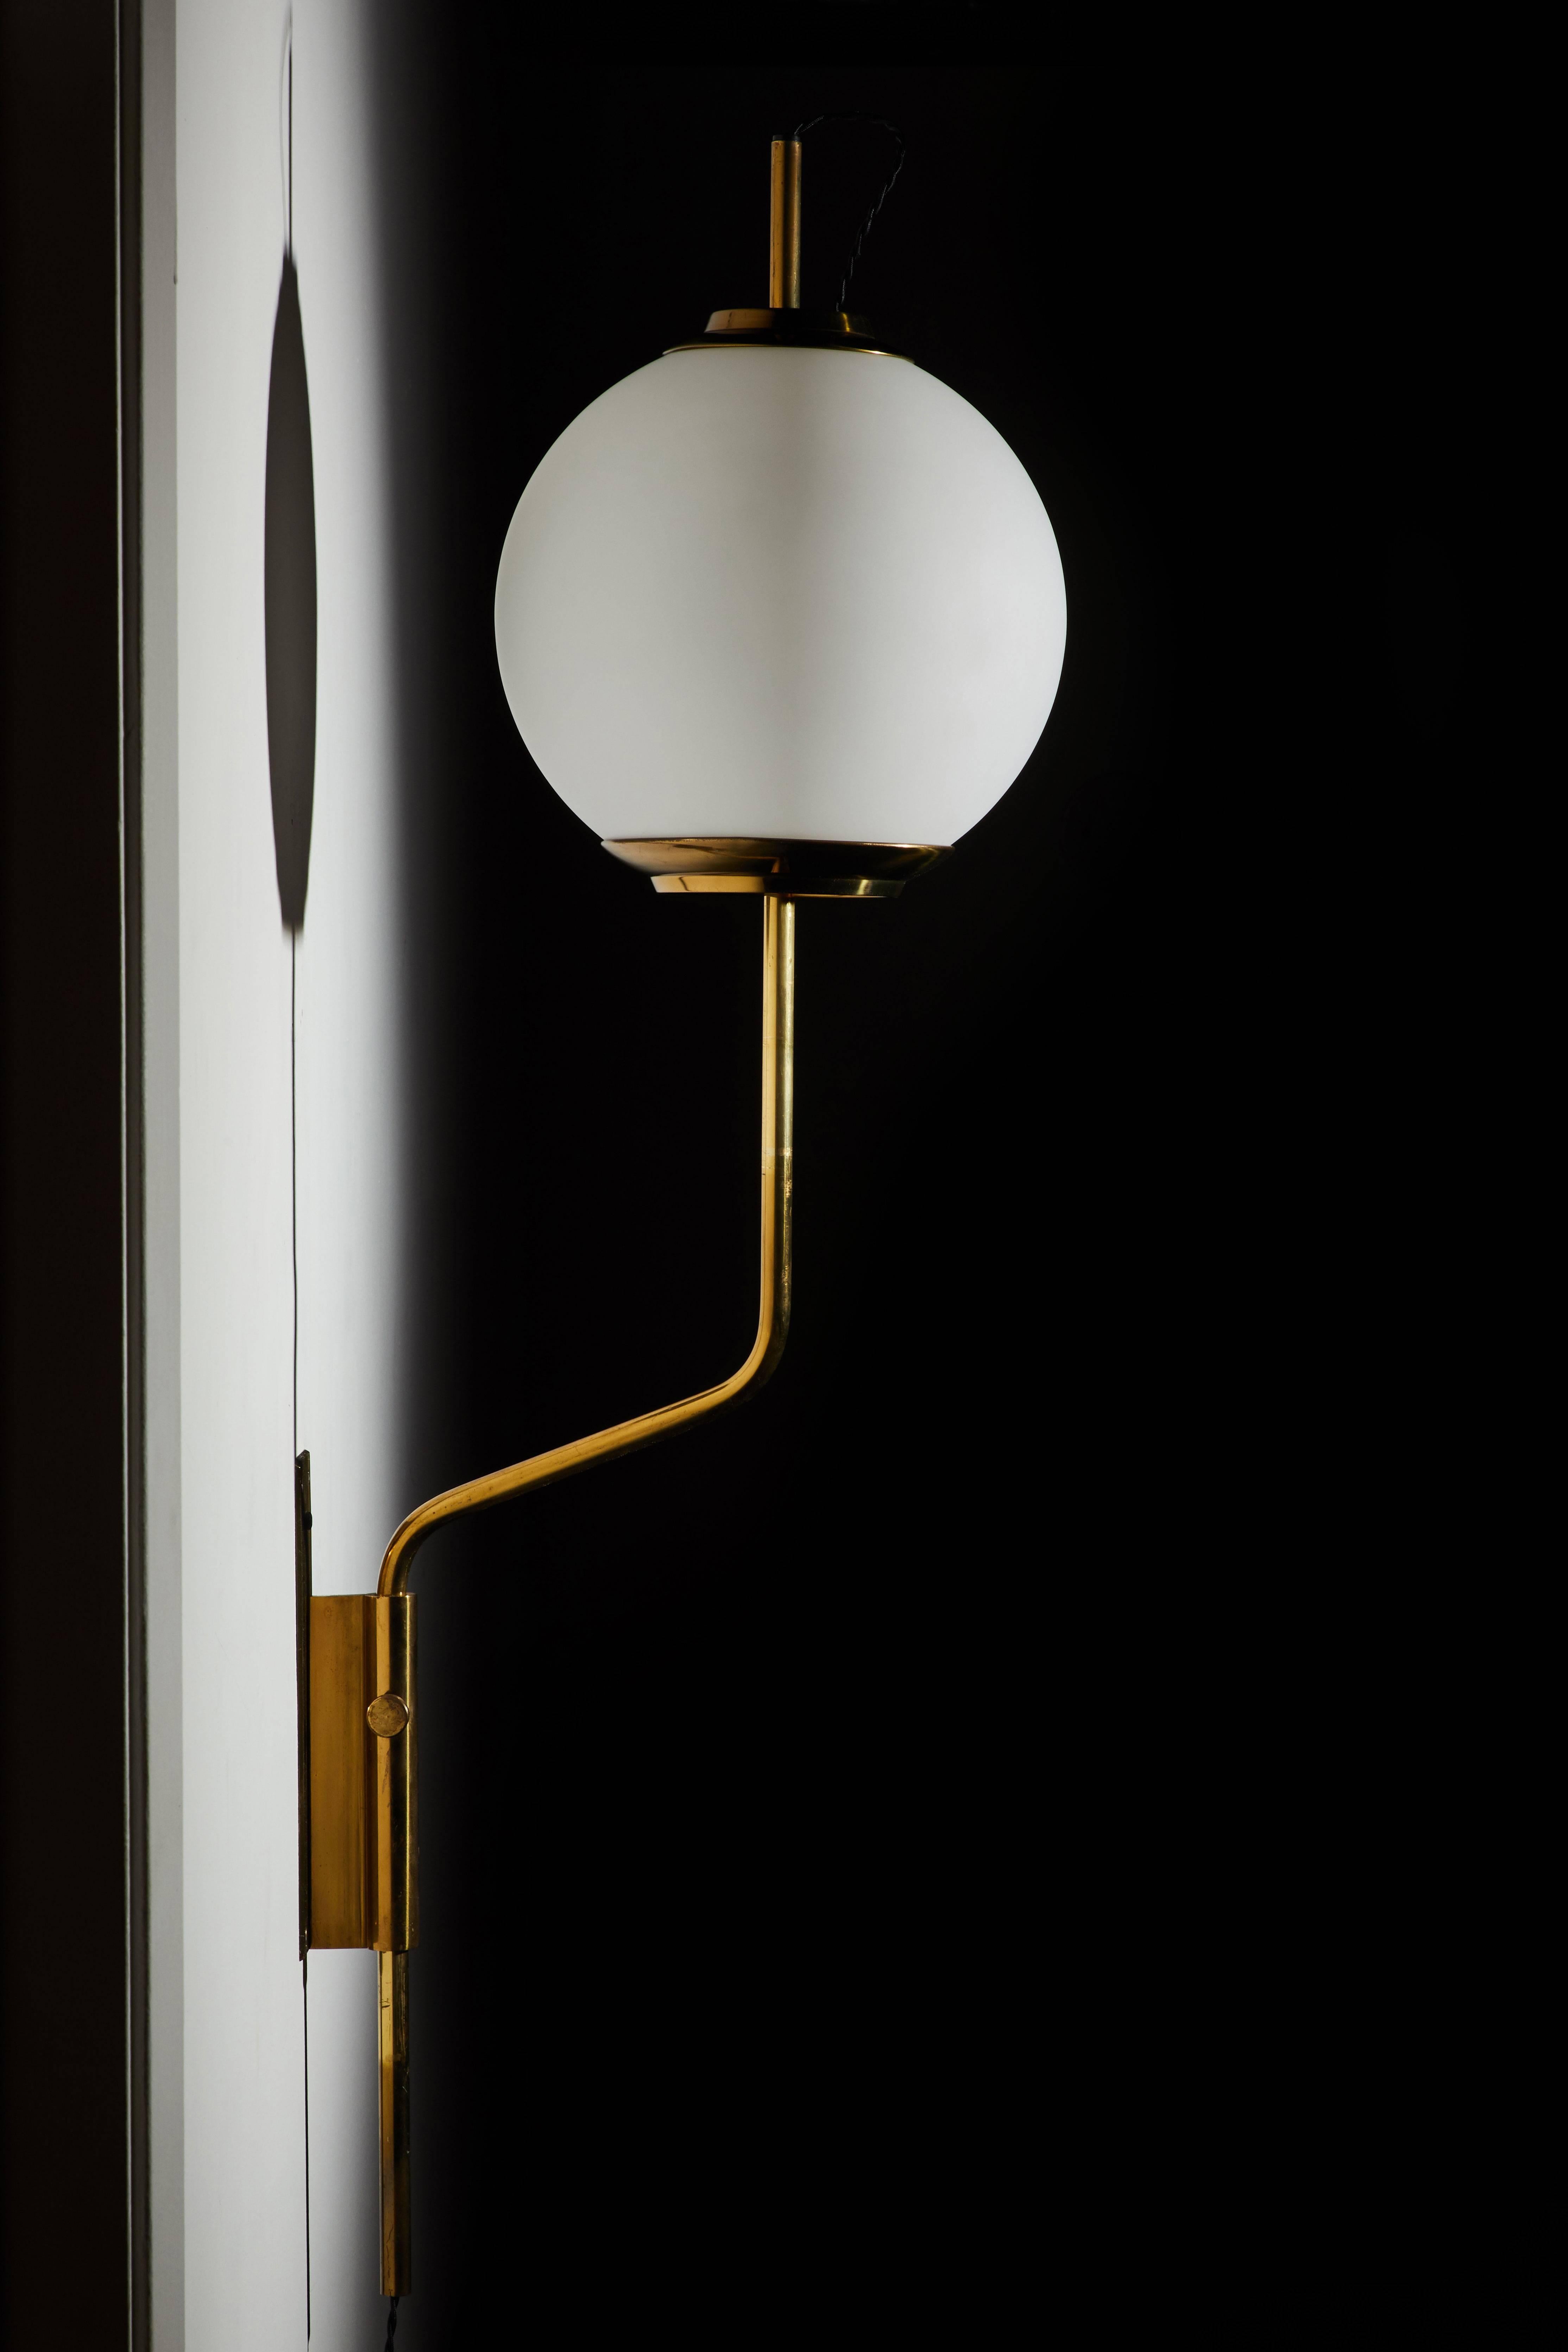 Pair of original model Lp11 pallone wall lights designed by Luigi Caccia Dominioni for Azucena. Manufactured in Italy 1958. Patinated brass and brushed sating glass with vertical positioning that pivots left/right. Original backplates. Wired in